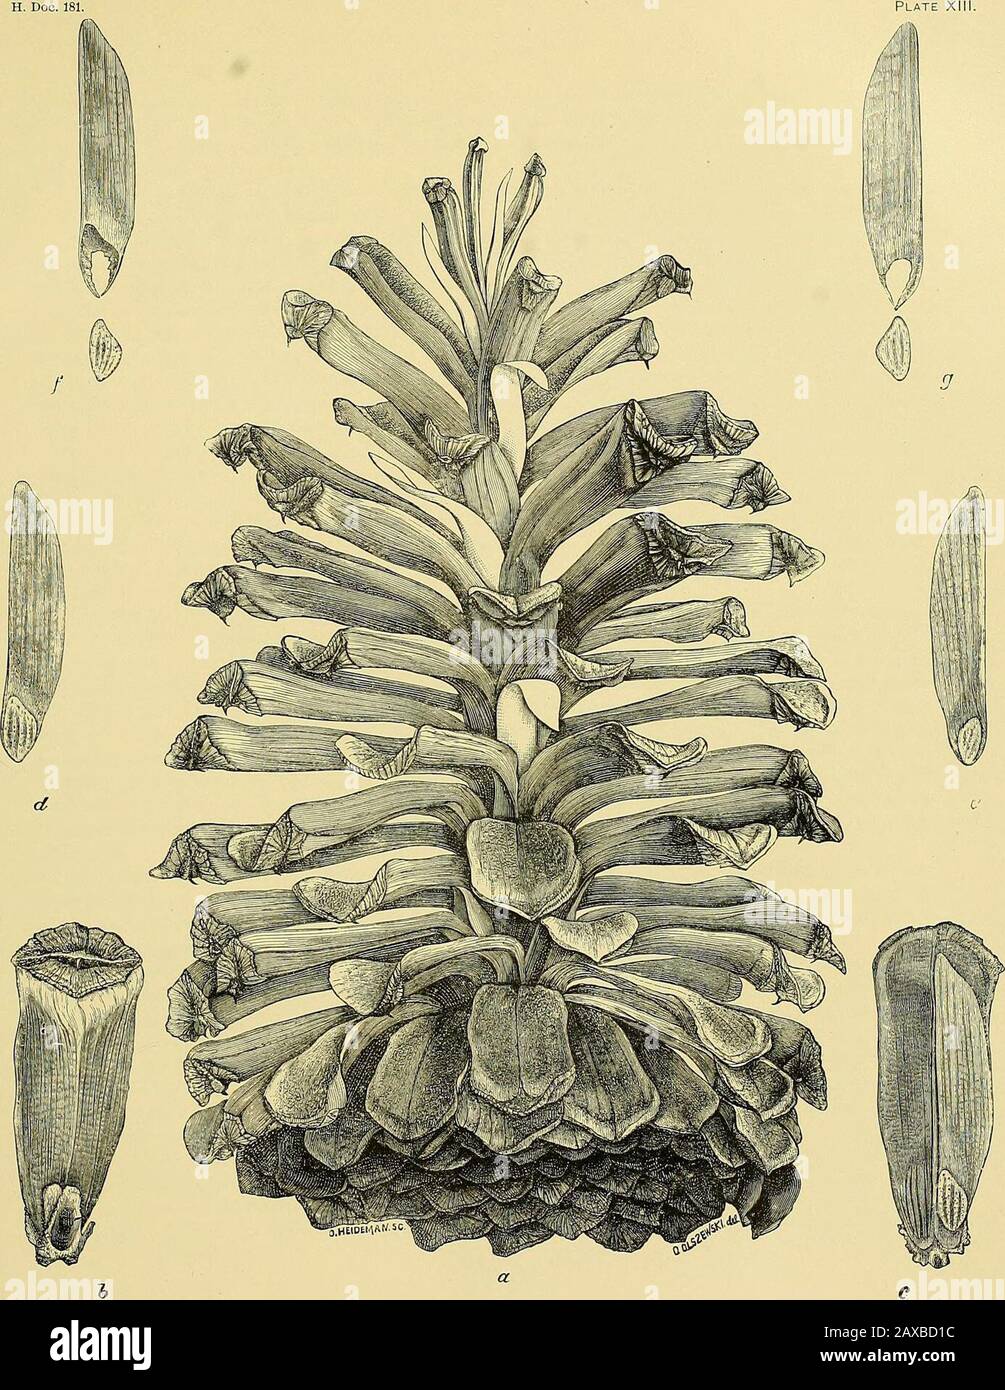 Report upon the forestry investigations of the U.SDepartment of agriculture1877-1898 . LoNGLEAF Pine (Pinus pauustris) : Male and Female Flowers. a fi-uiting branch with female aments at tip, and one and two seasons cones; b. maleaments; f, female ament; d. saed-beai-ing scales; c, /, male aments g, detached anthers; It, i, detached lemale flowers.. LoNGLEAF Pine (Pinus palustris Mill.): Fruit. a, open cone, natural size; b, c, detached scales, dorsal and ventral; d, e,f, g, seeds with wing-s. CUBAN PINE. 77 prevailing- at present, trees of such small size are tapped that they are unable to re Stock Photo